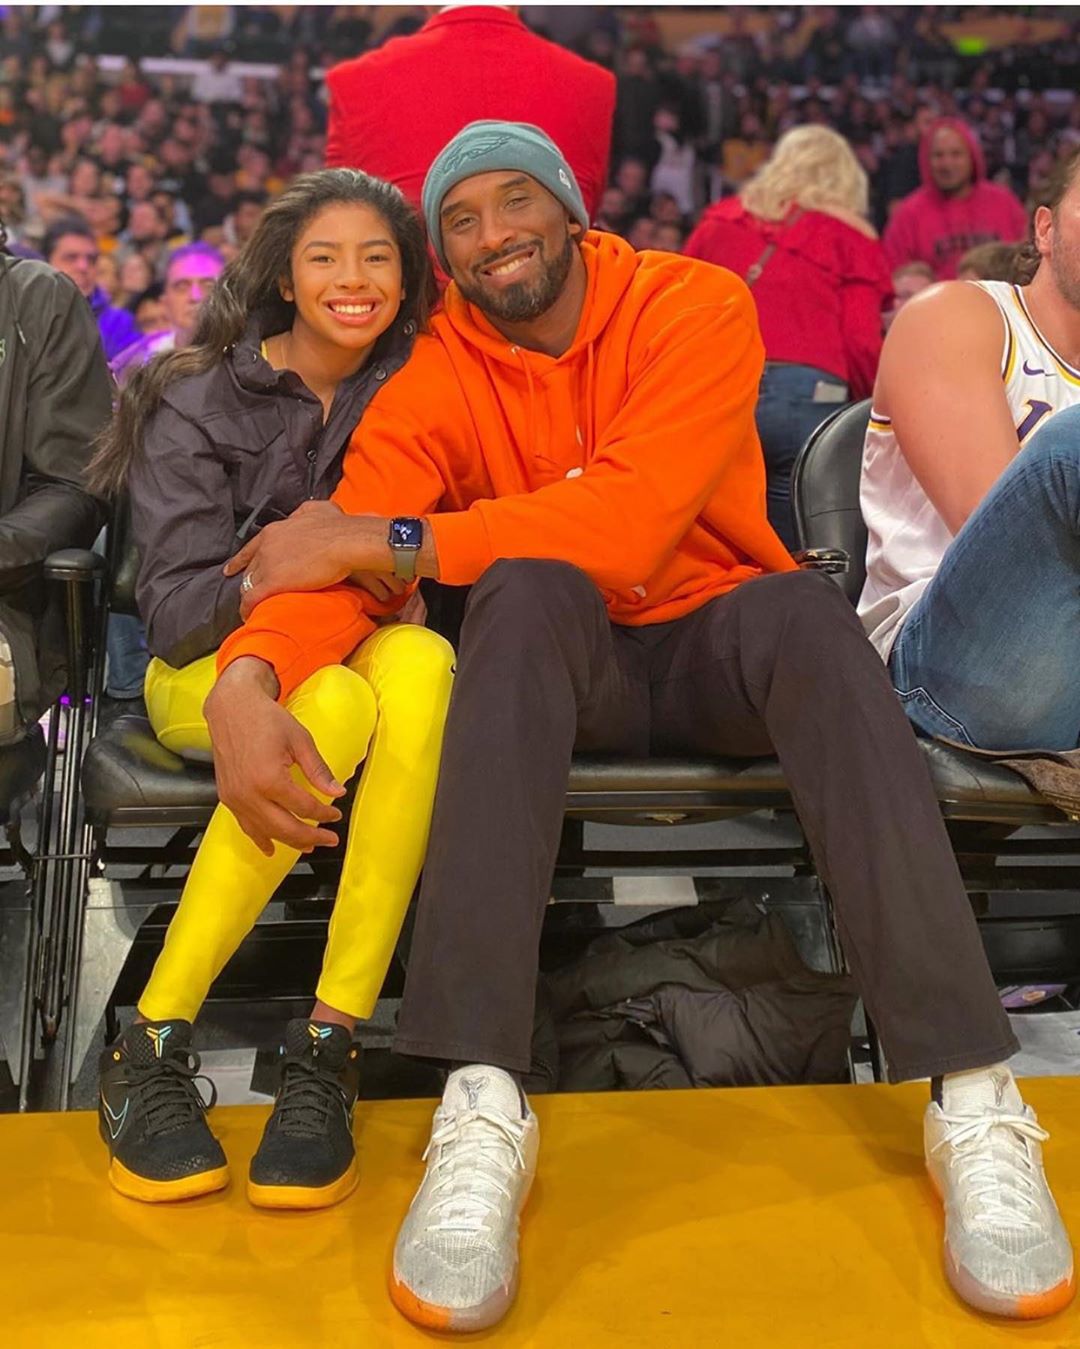 Los Angeles honours Kobe Bryant and daughter Gianna with public